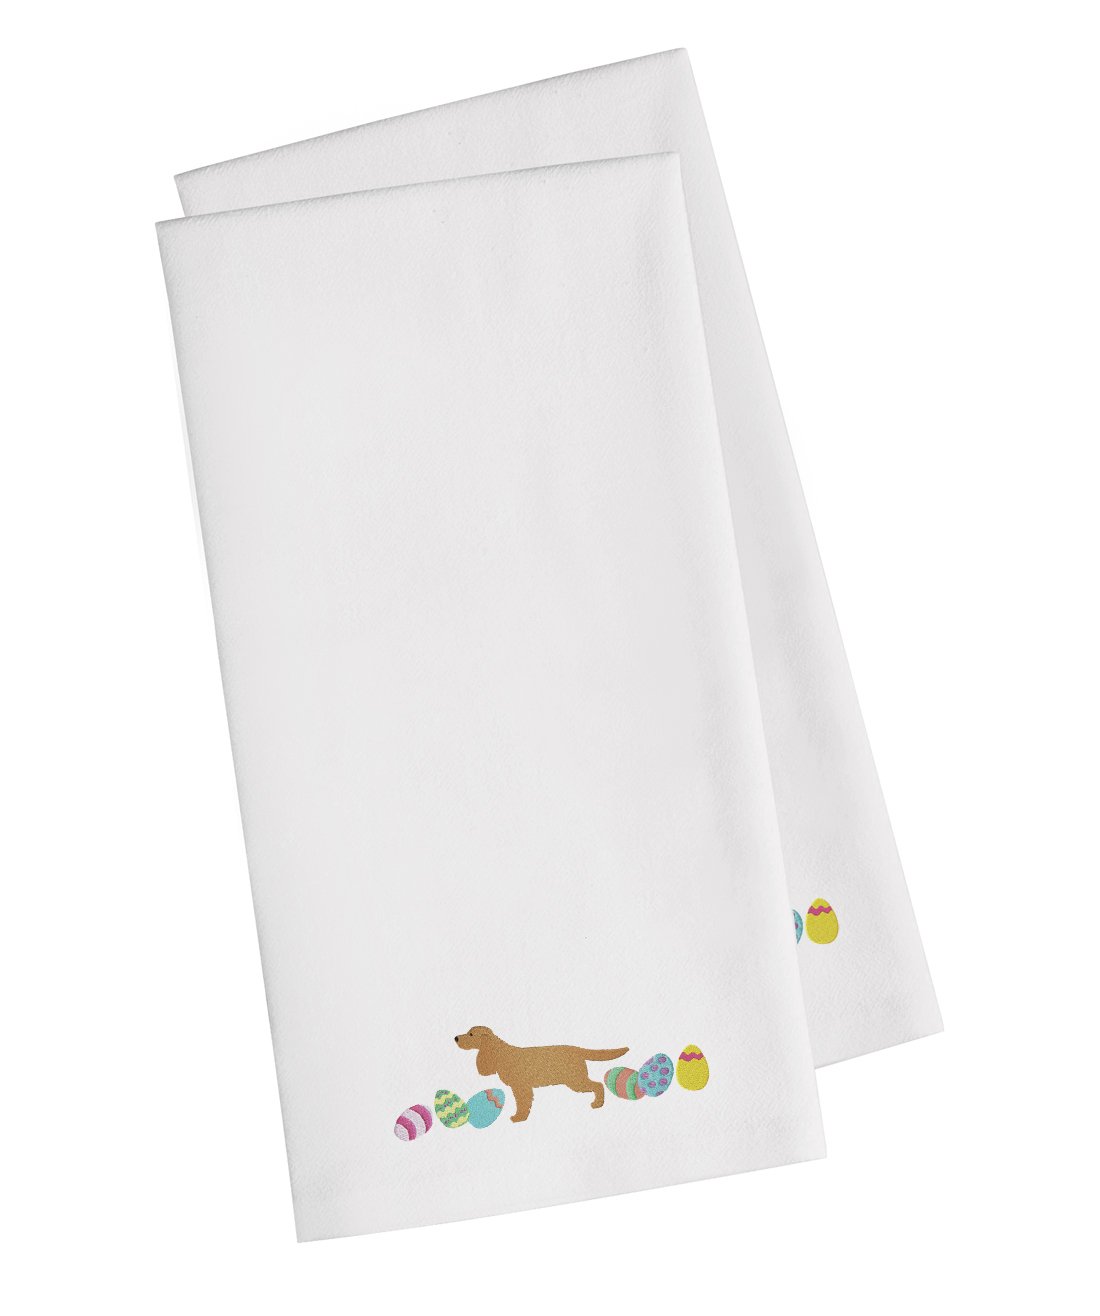 English Cocker Spaniel Easter White Embroidered Kitchen Towel Set of 2 CK1637WHTWE by Caroline's Treasures